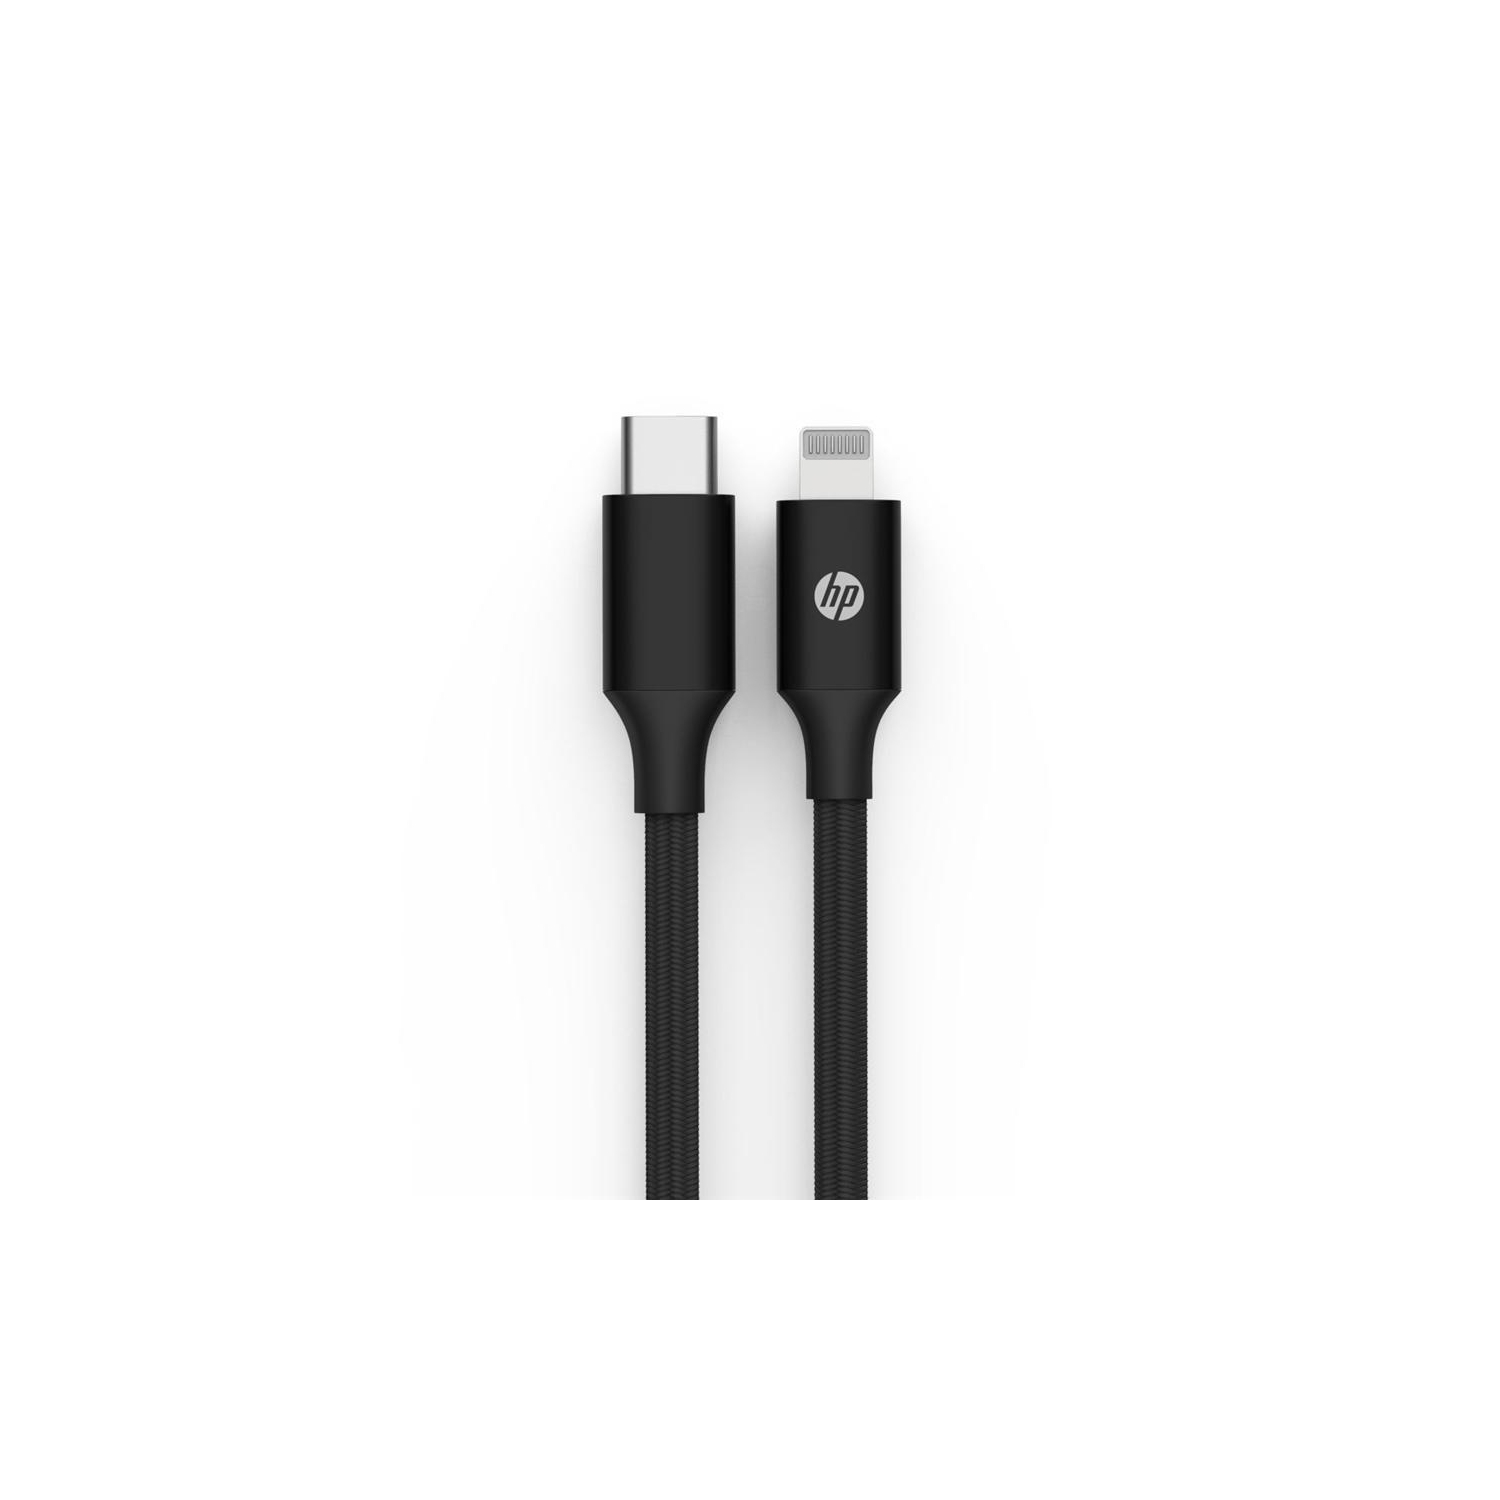 HP - USB C to Lightning Cable, Charge and Sync, Aluminum Alloy, 2 Meter Length, Black